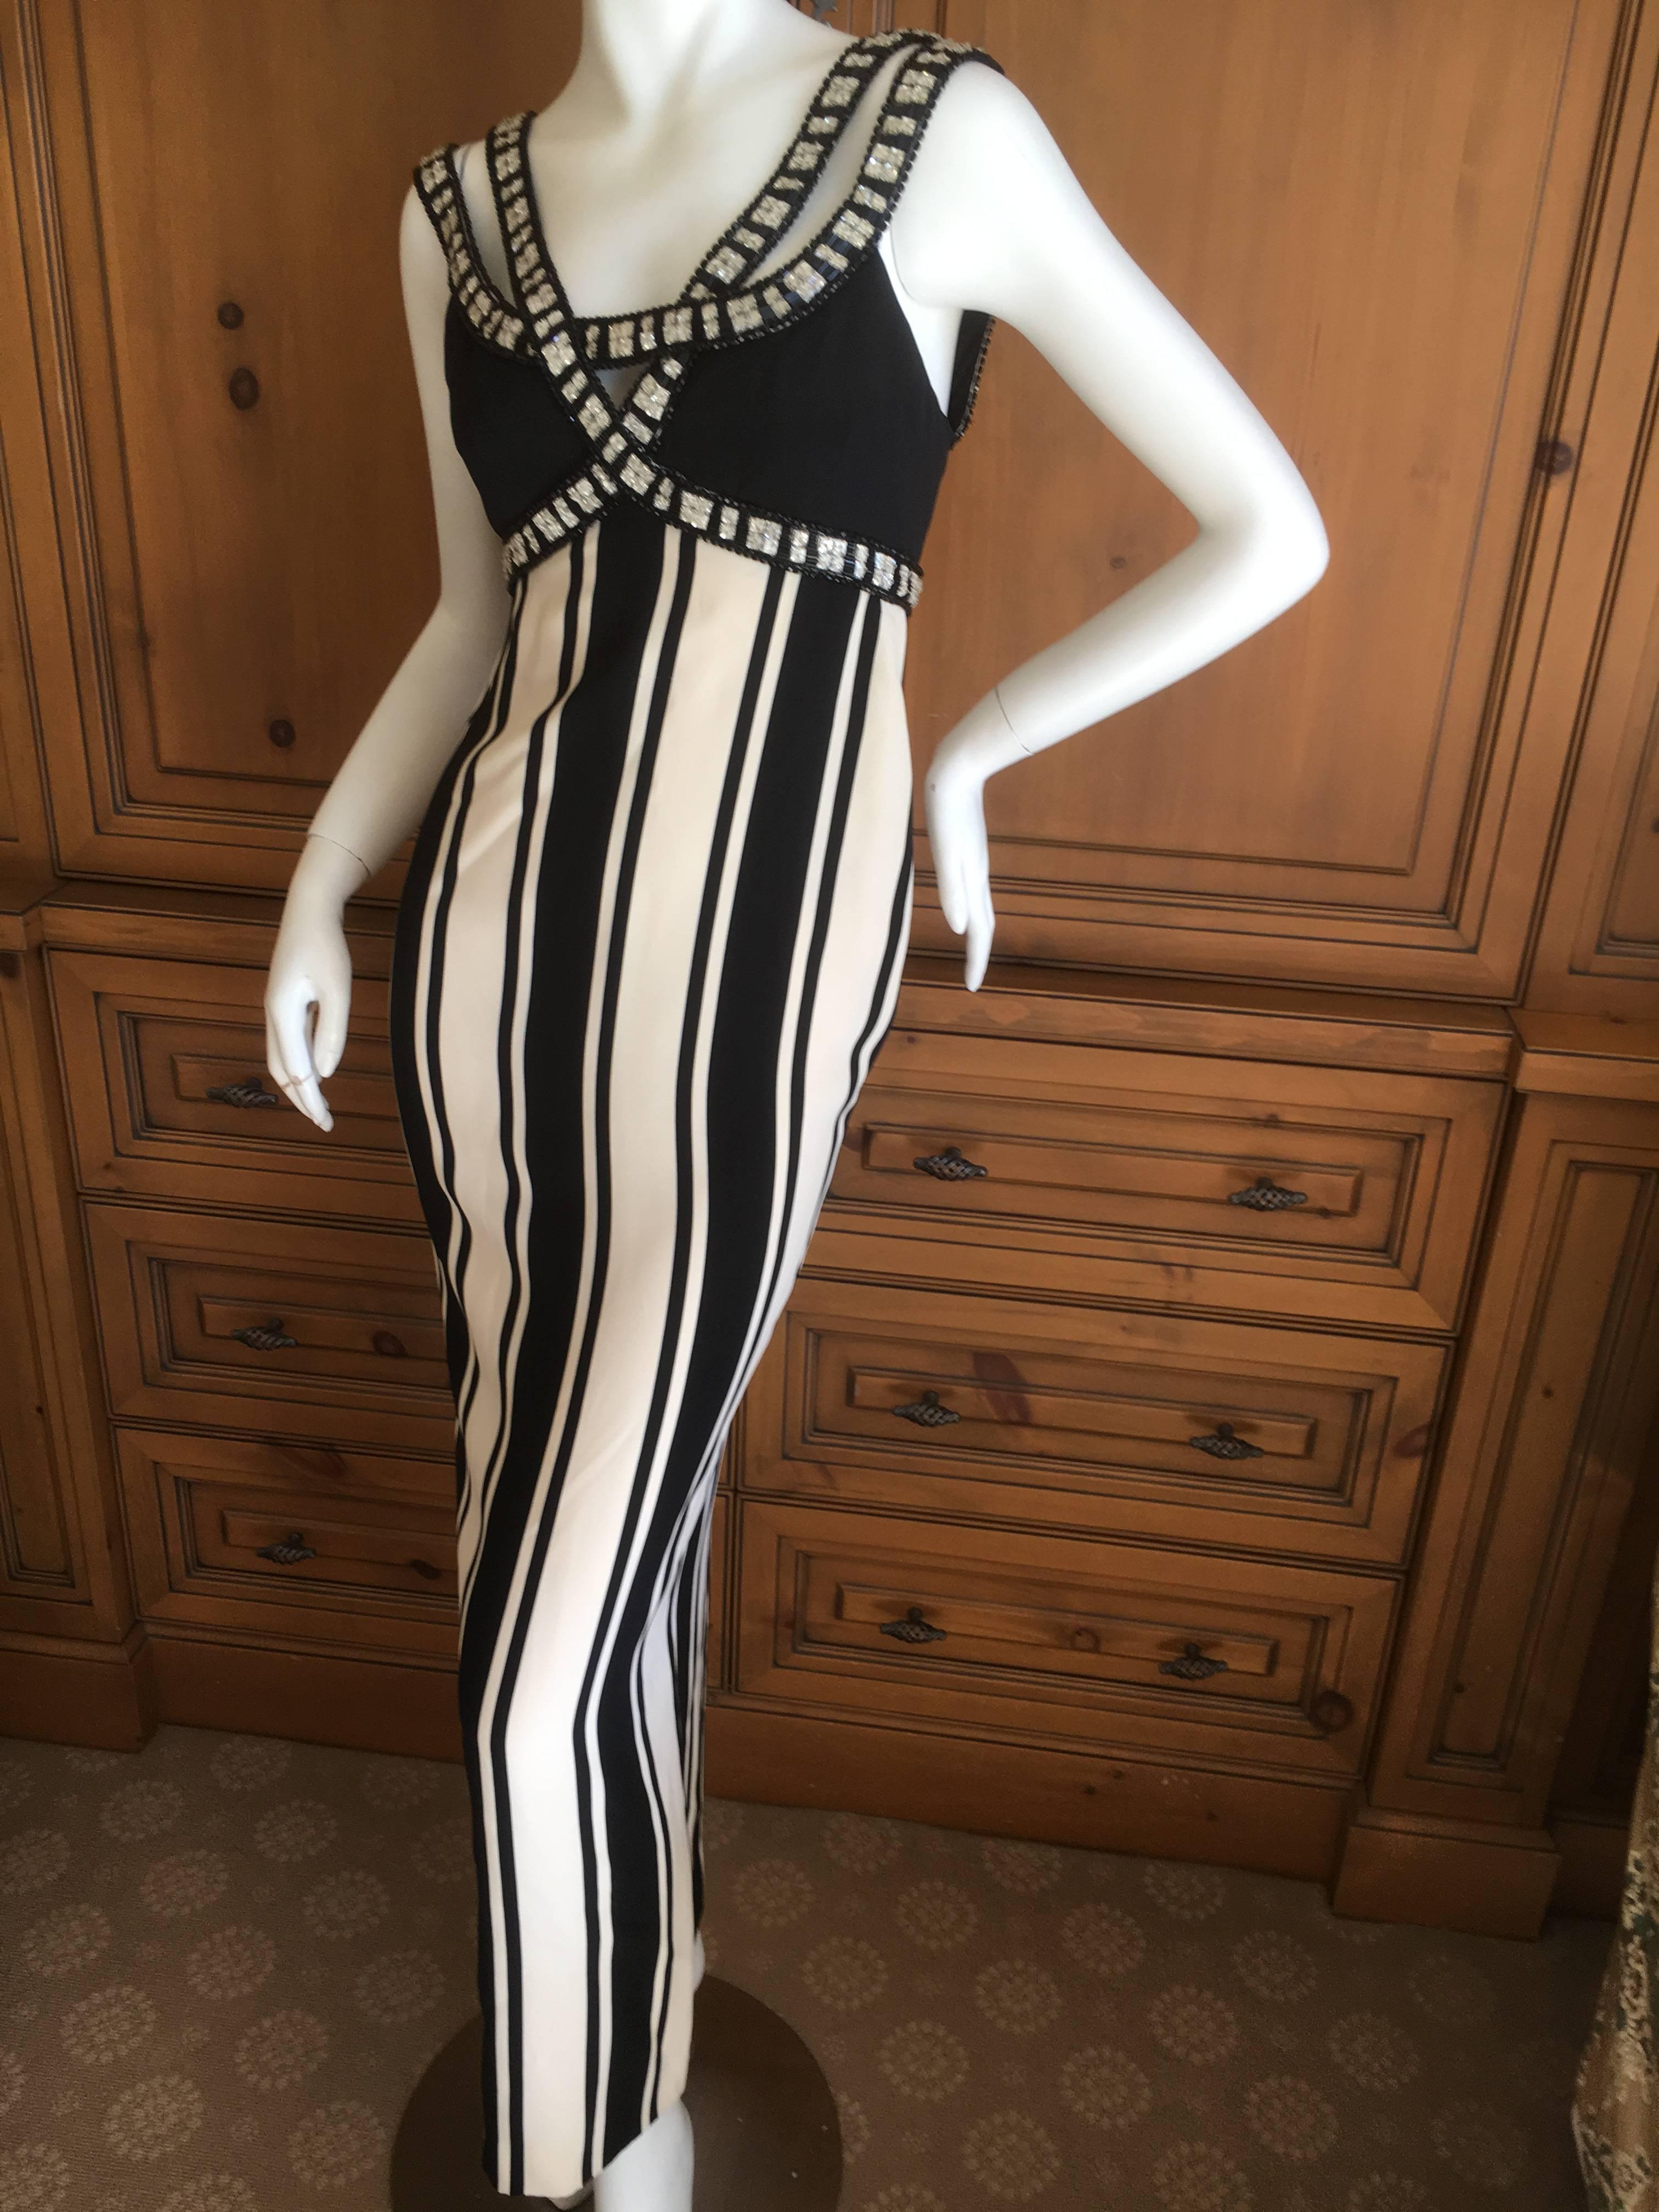 Exquisite mod dress from James Galanos circa 1970.
Featuring a sexy jeweled bodice , a very high back slit, and a large matching shawl with fringe ends.
Fully lined in pure silk, with superb jewel and bead details, this is simply superb.
Classic